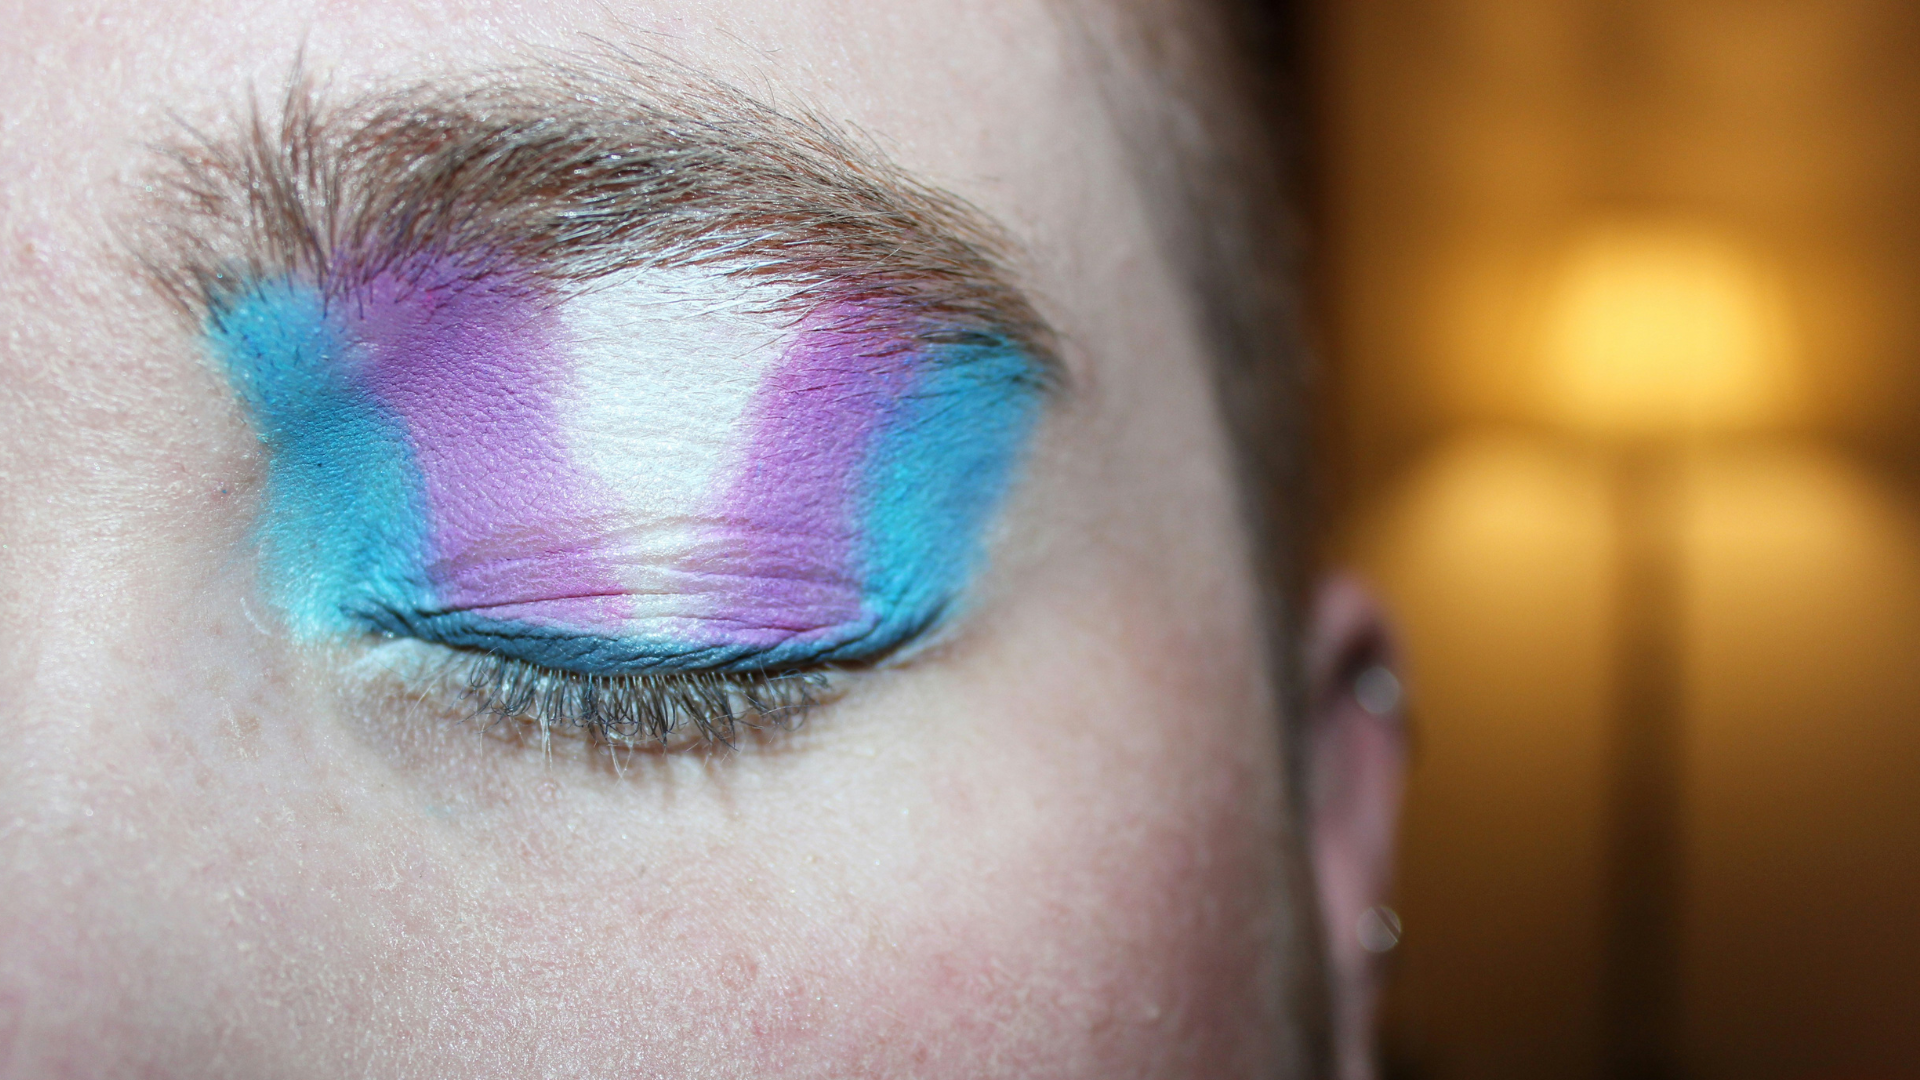 A close up photo of a person's closed eye wearing pink, blue and white eyeshadow with a tall floor lamp glowing in the distance